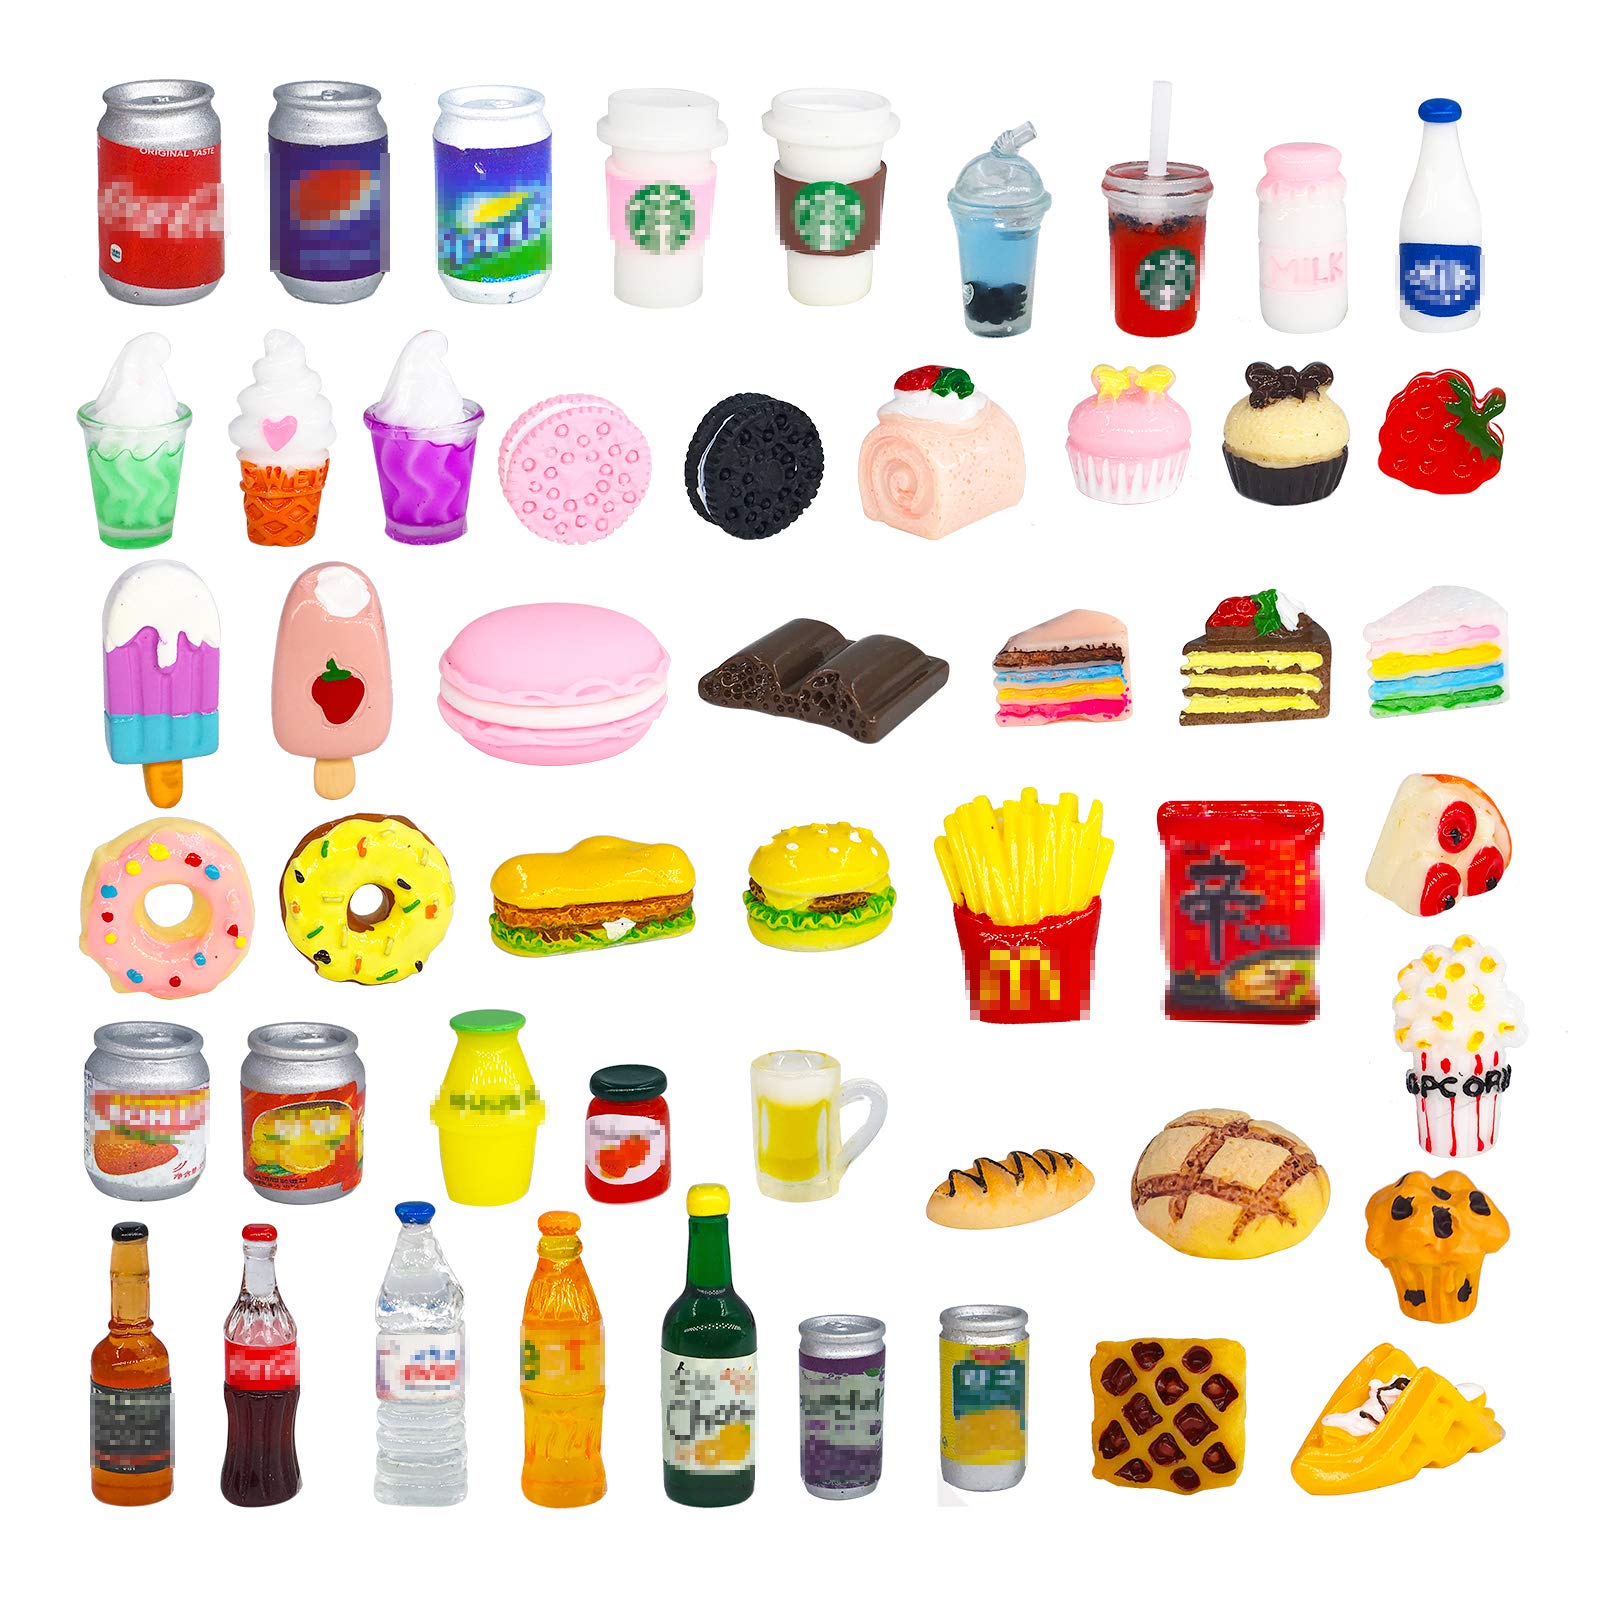 HSJH 50 Pcs Miniature Food Drink Bottles Soda Pop cans Pretend Play Kitchen game Party Accessories Toys Hamburg cake Ice cream for 11